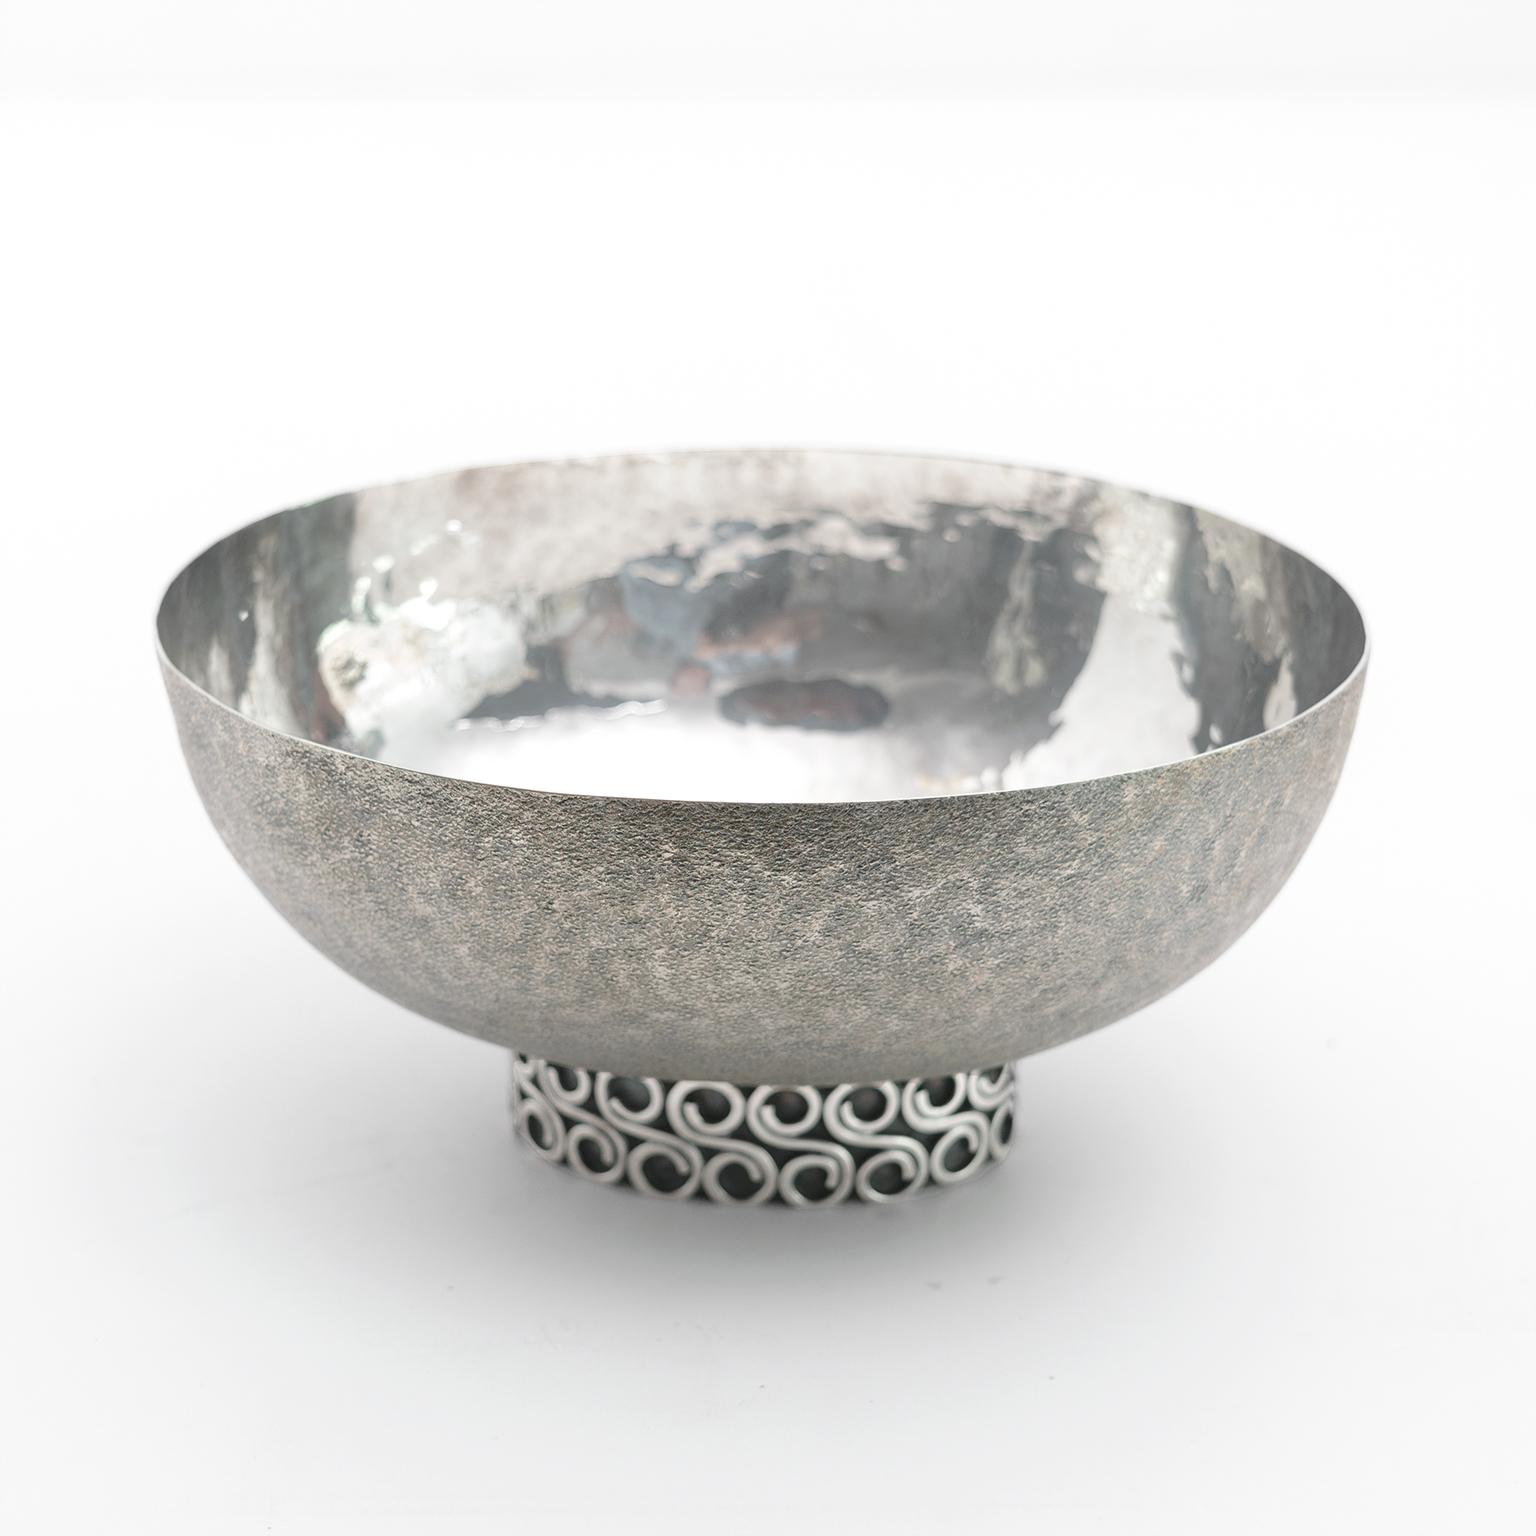 Mid-Century Modern Viennese, Austrian Sterling Silver Crafted Footed Bowl from Mid 20th Century For Sale